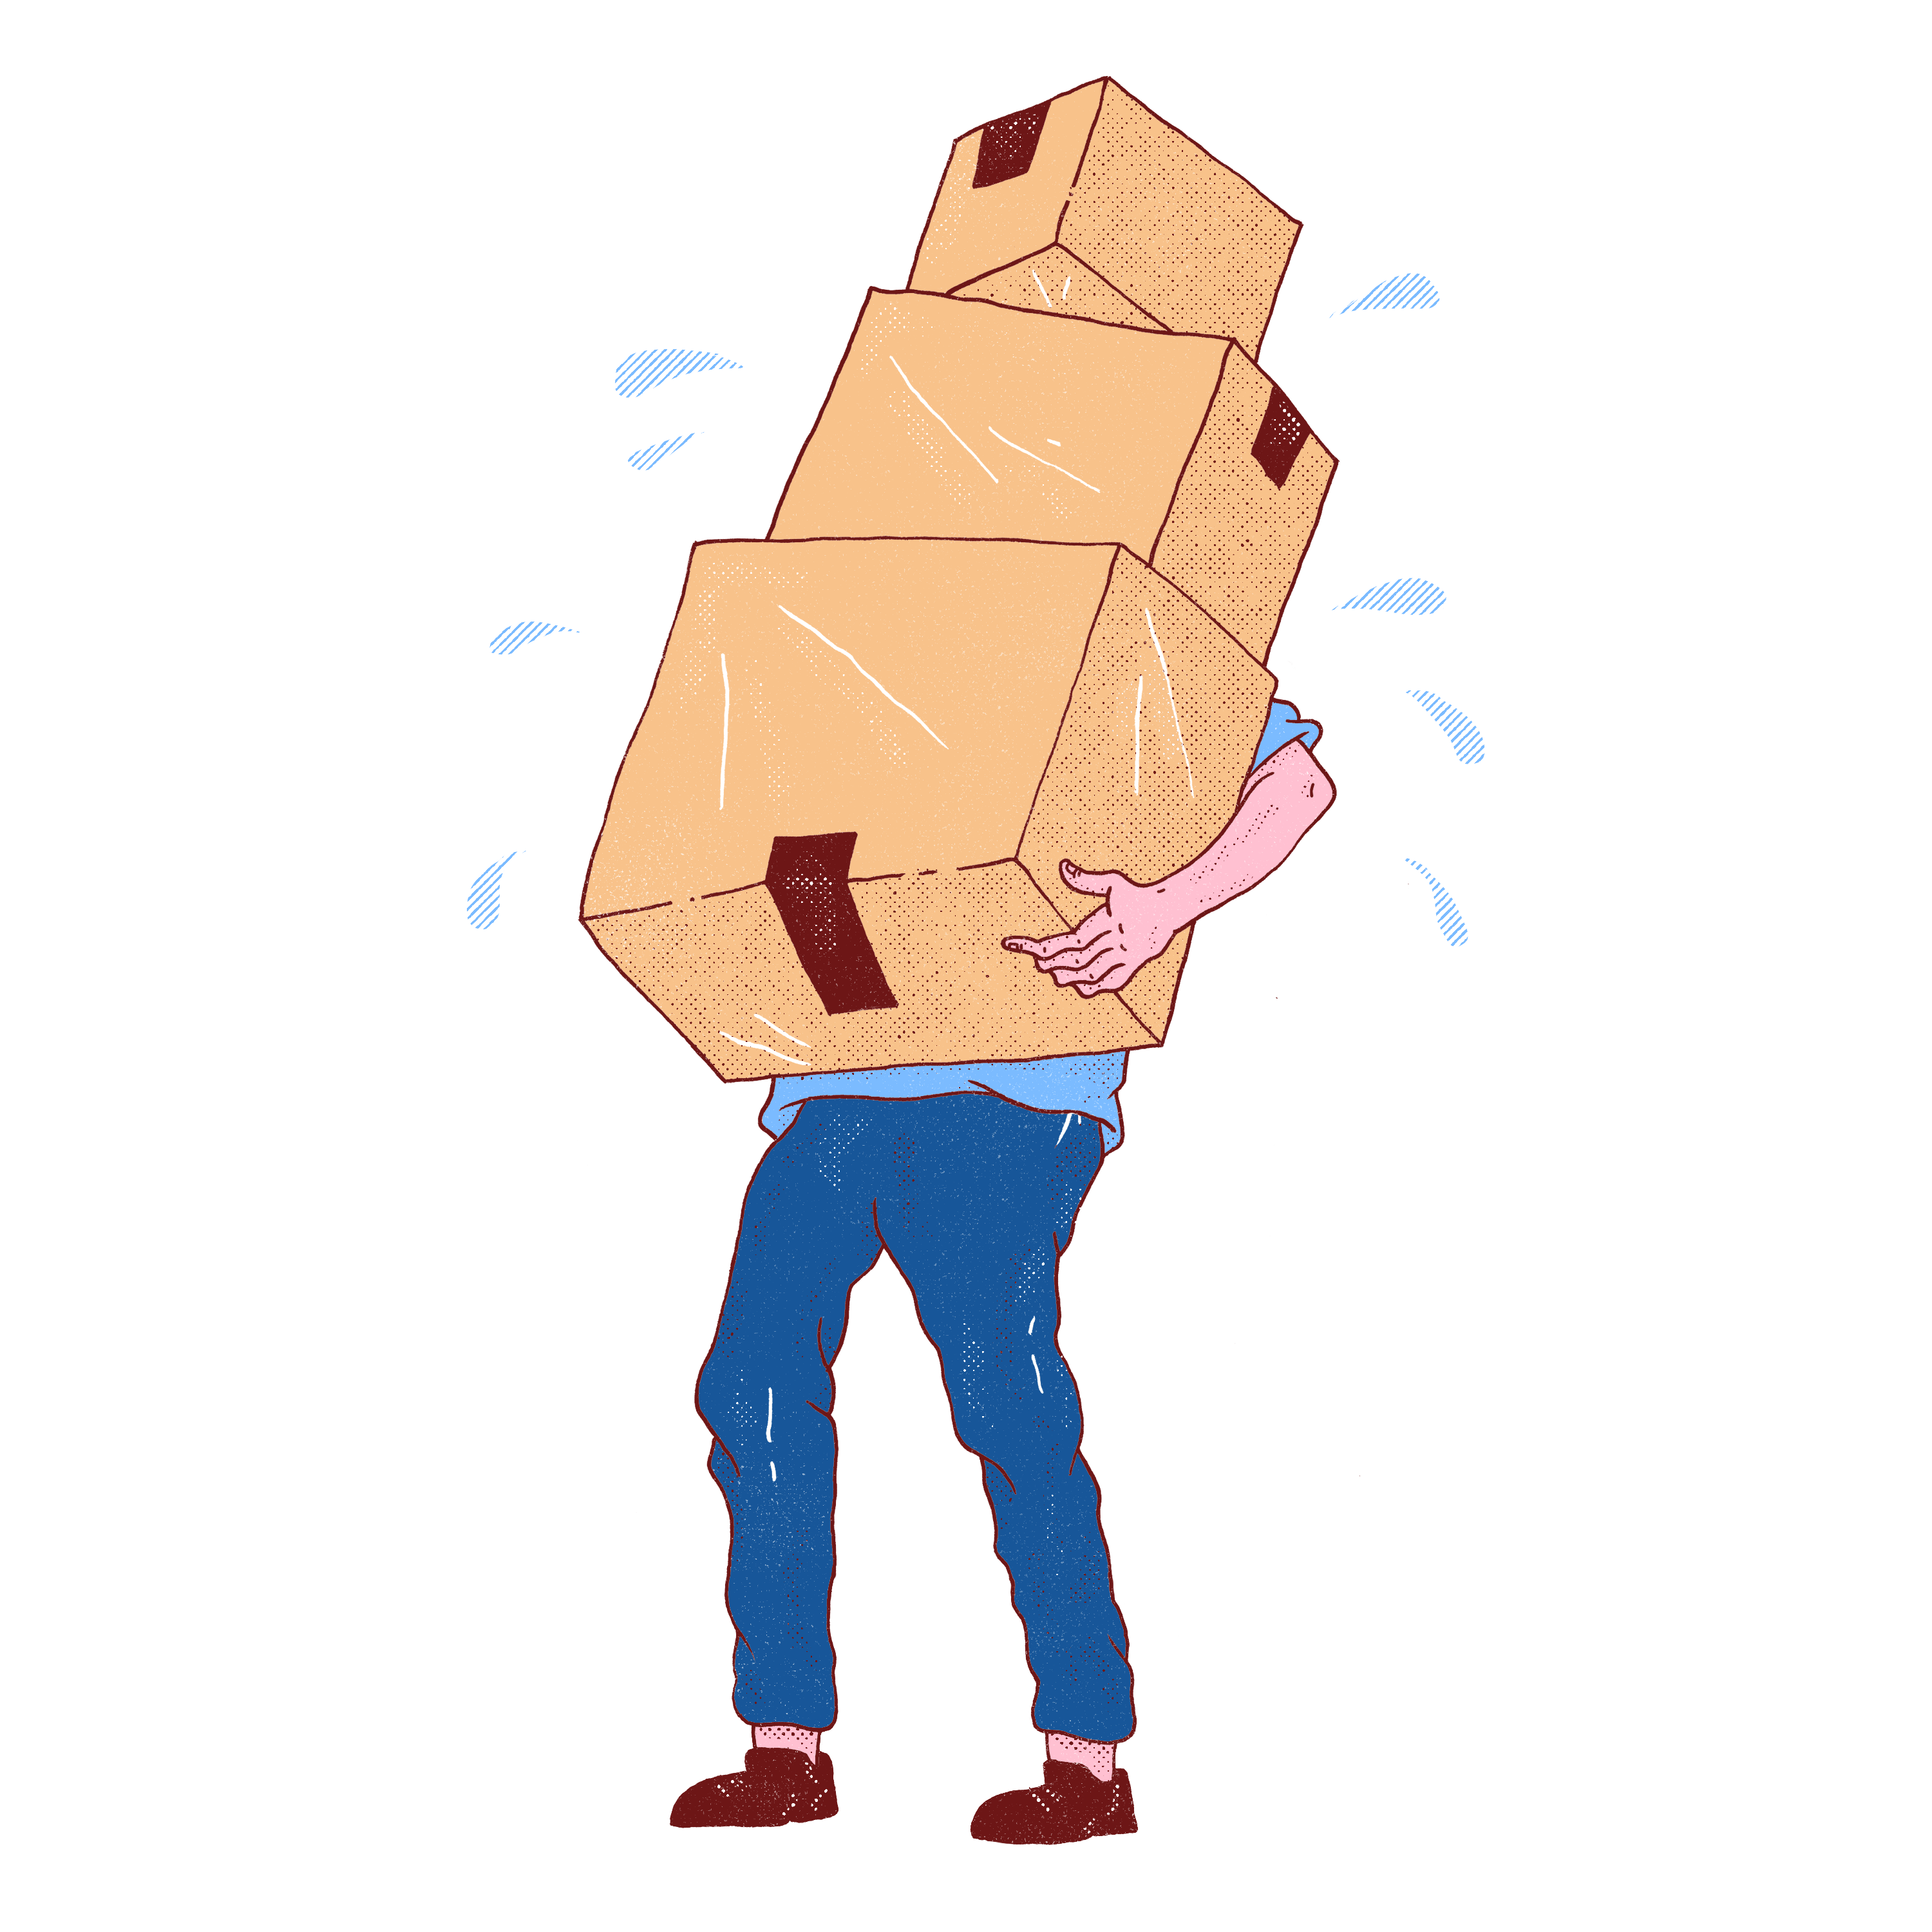 Illustration of a man holding boxes sweating